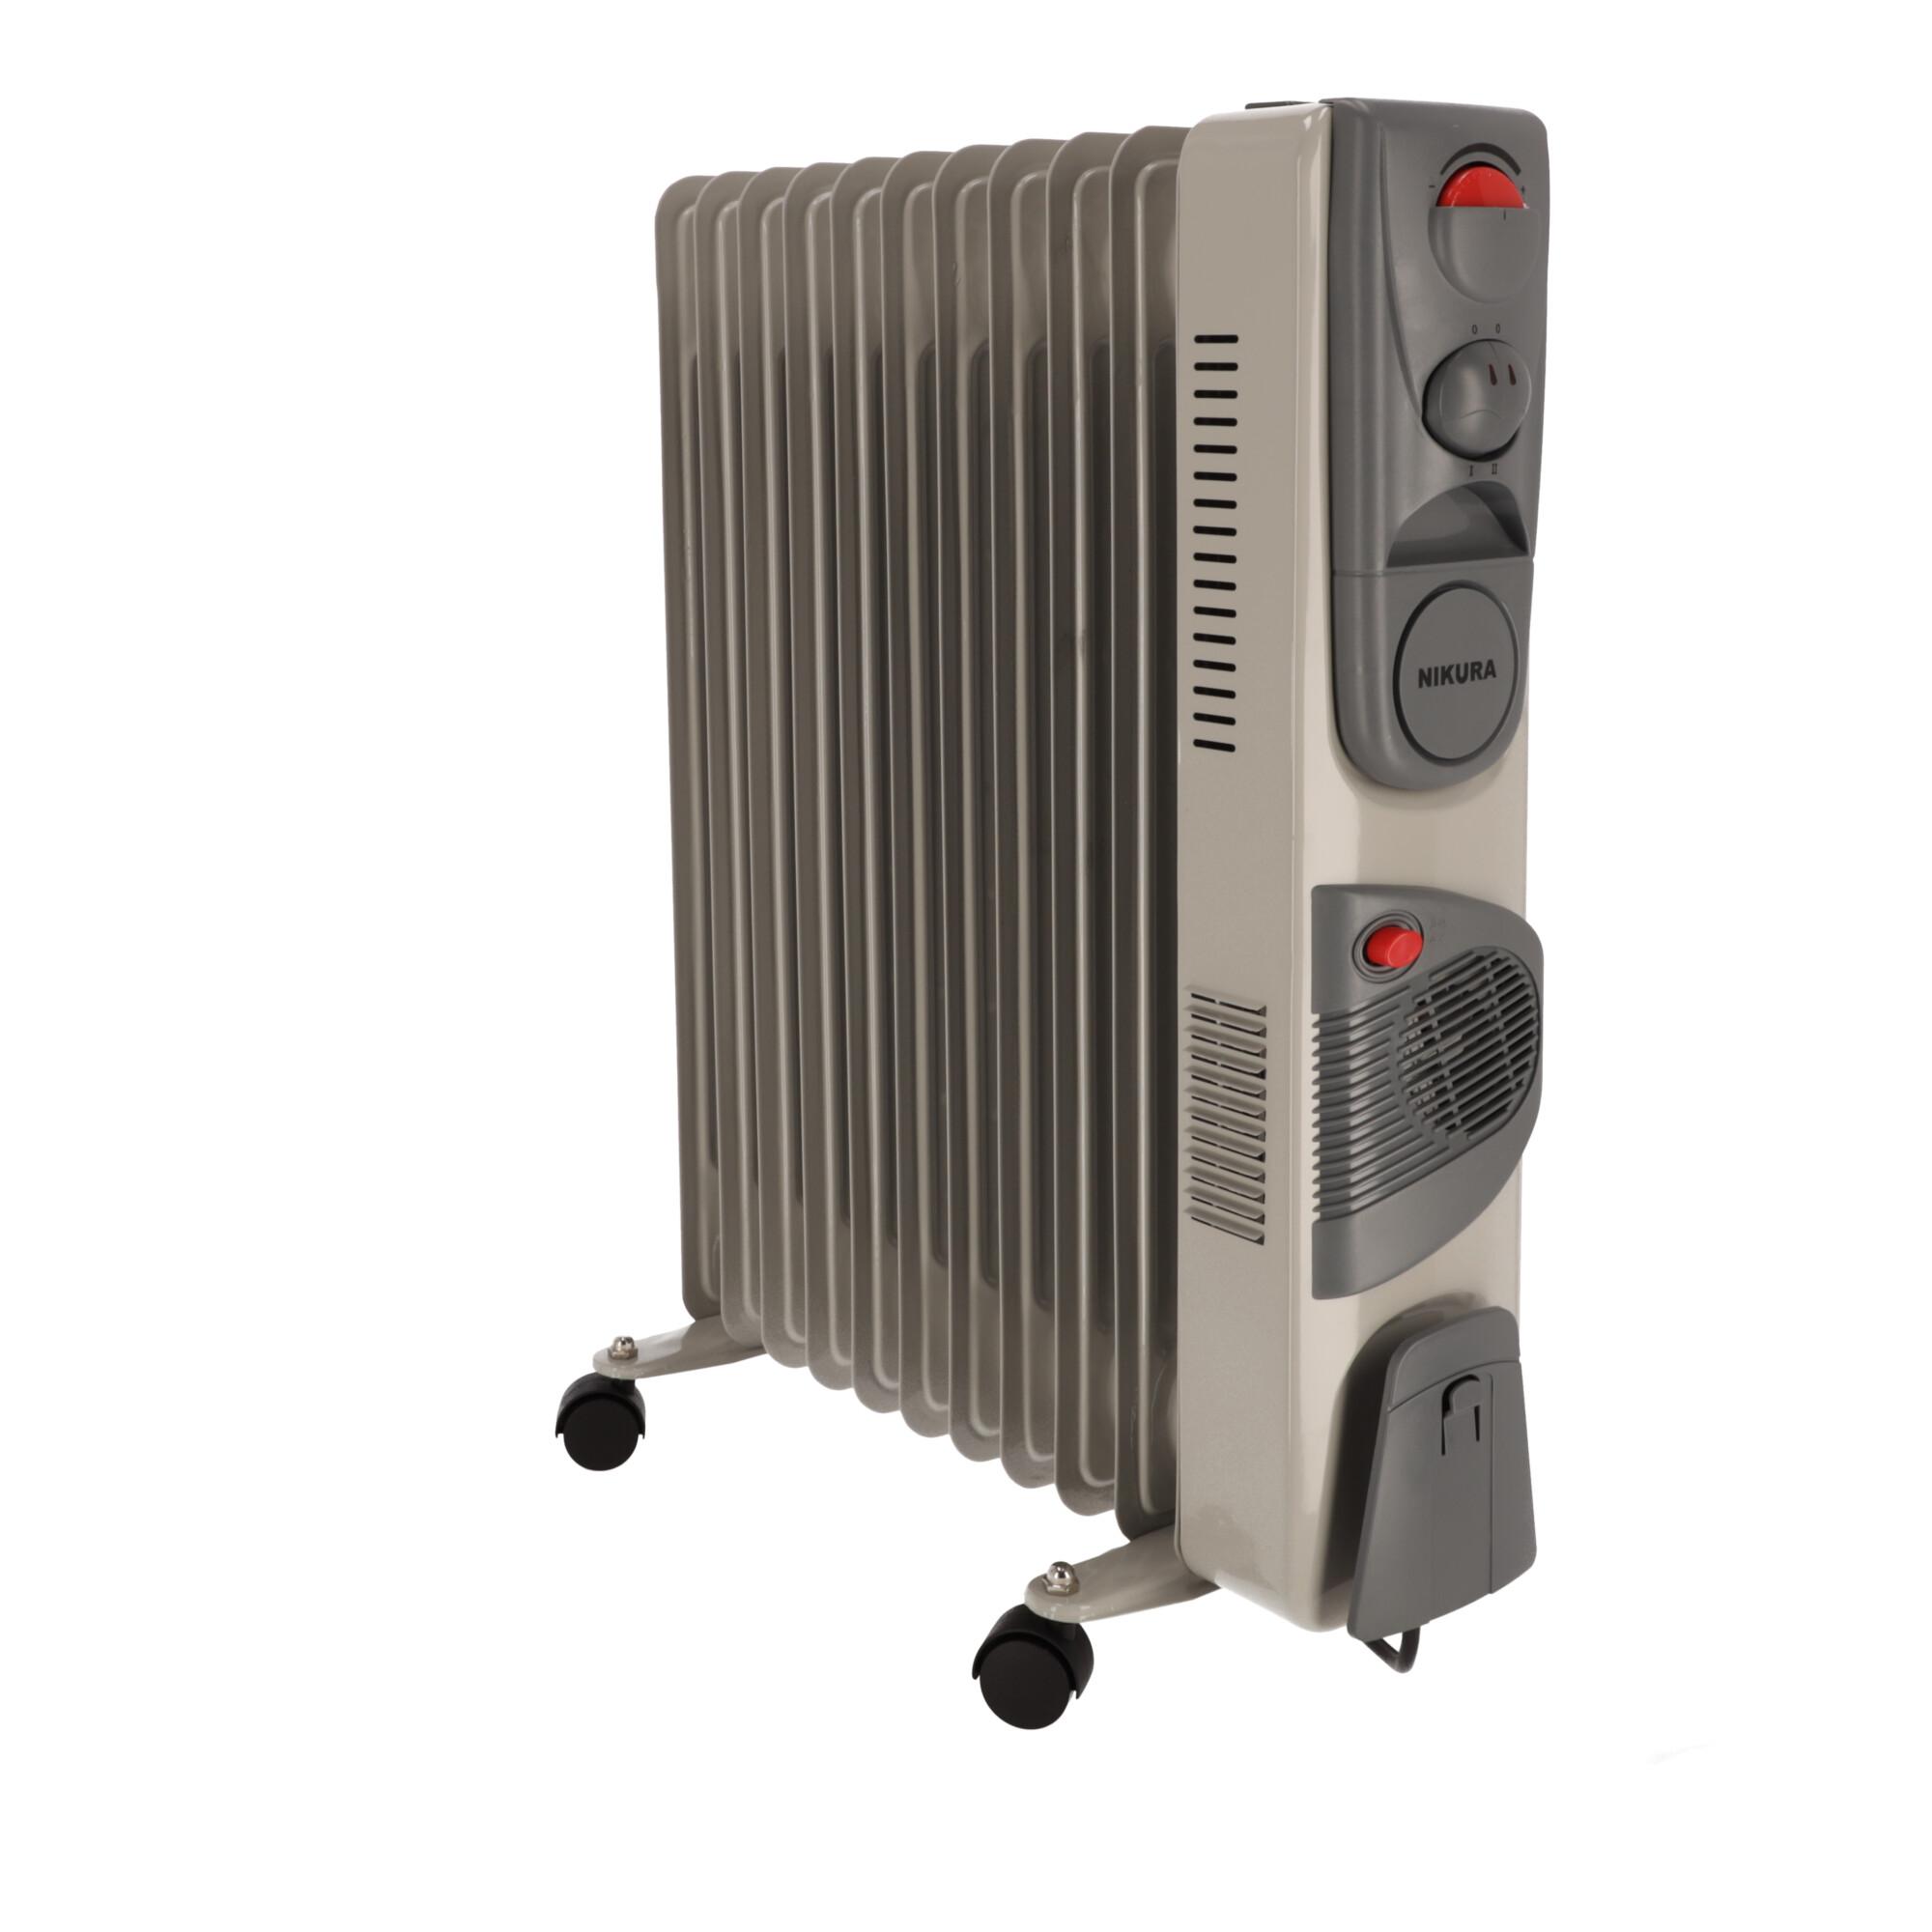 Oil fired electric heater 11 ribs